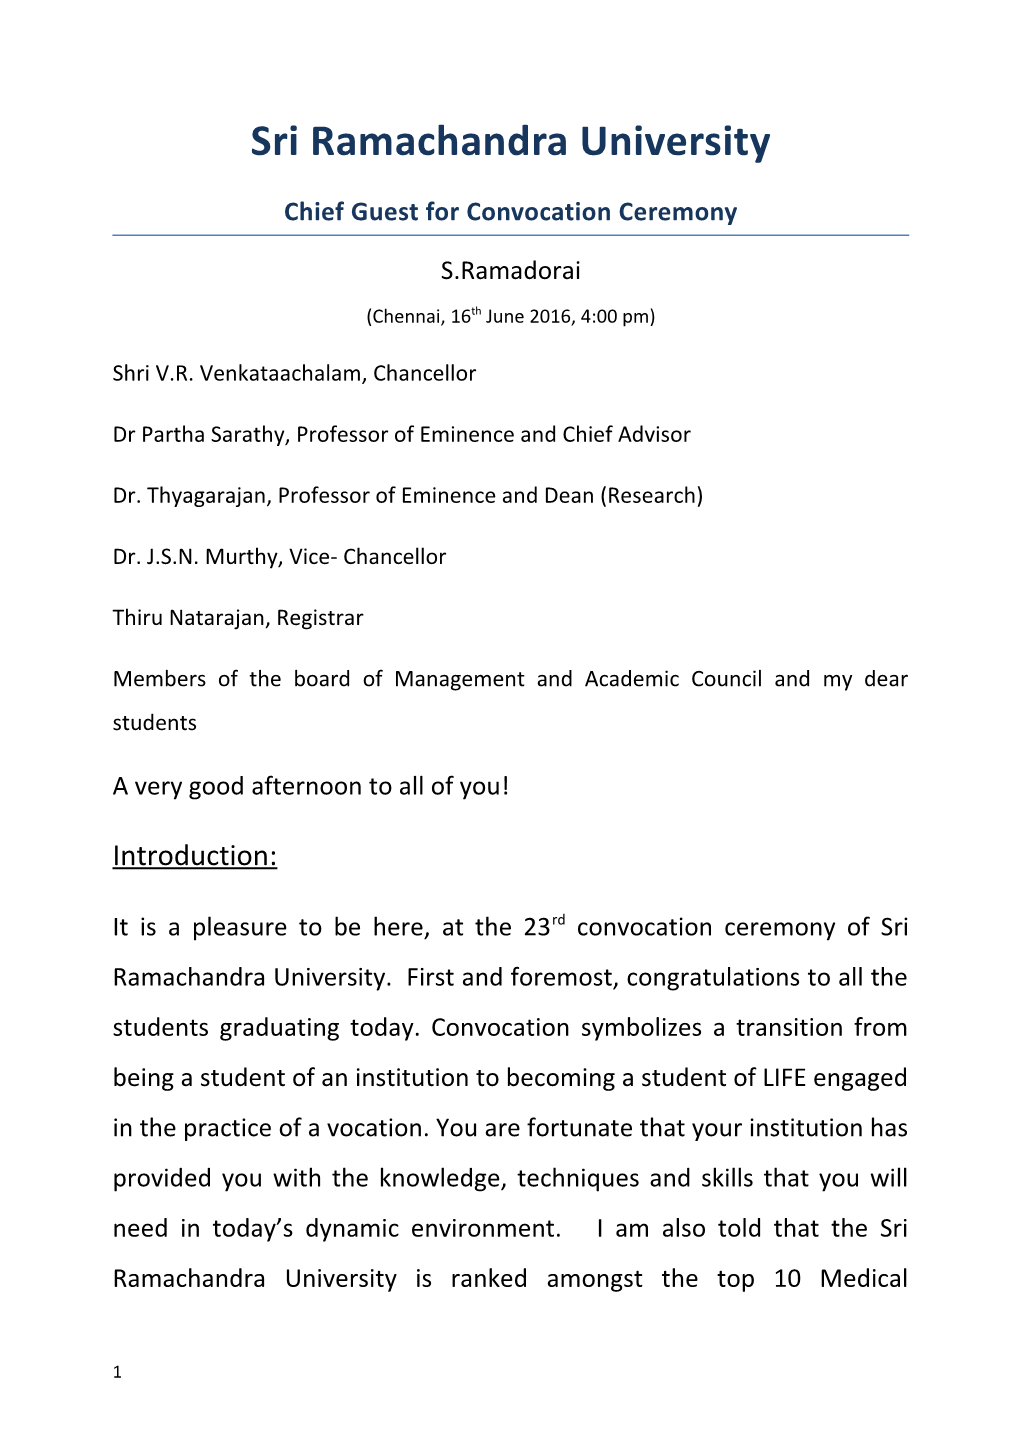 Chief Guest for Convocation Ceremony